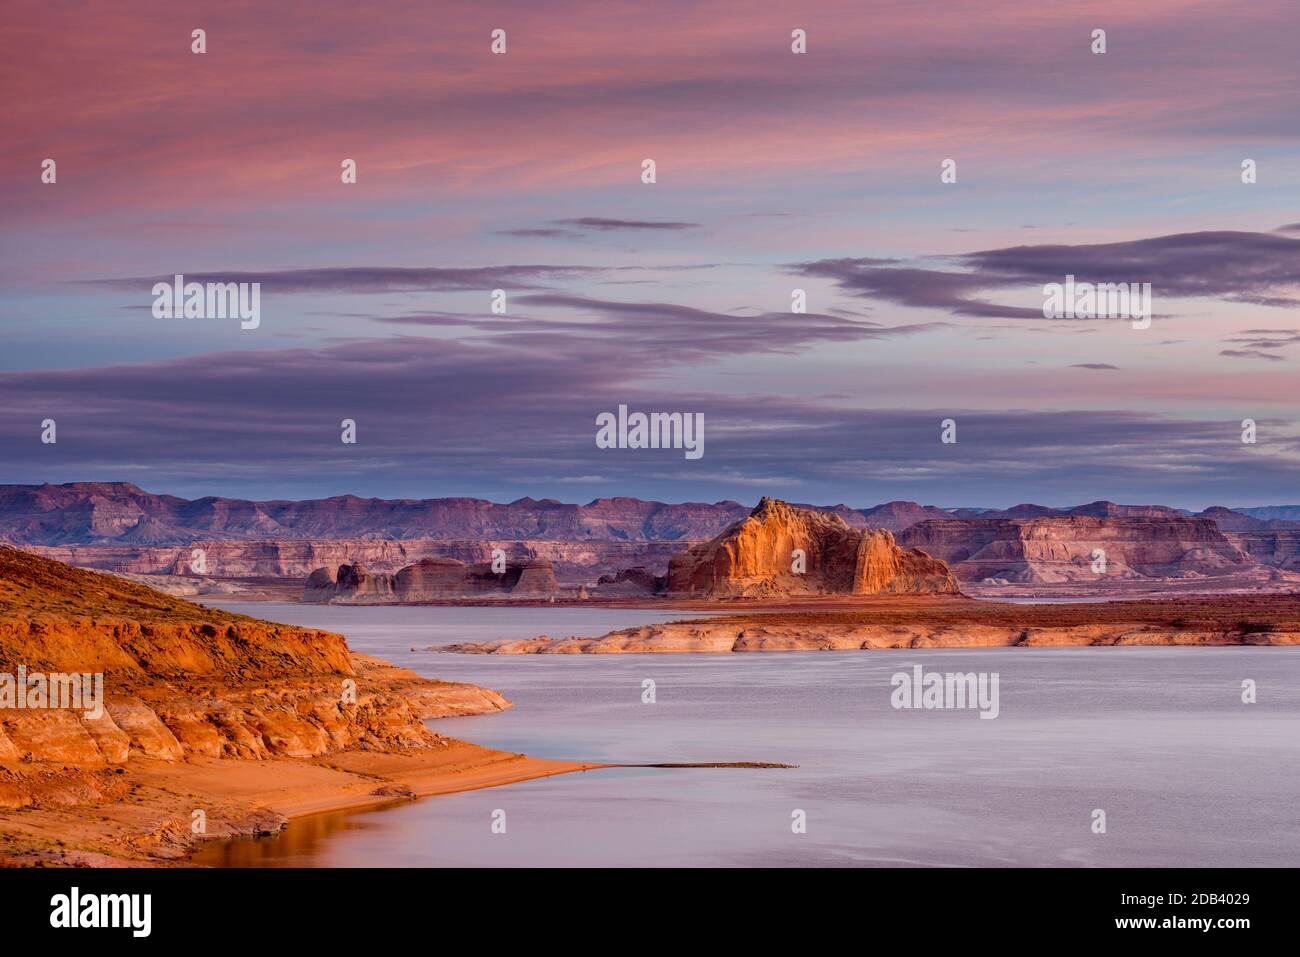 Unique scene of Lake Powell at sunrise with colorful clouds and rocky desert formations. Stock Photo